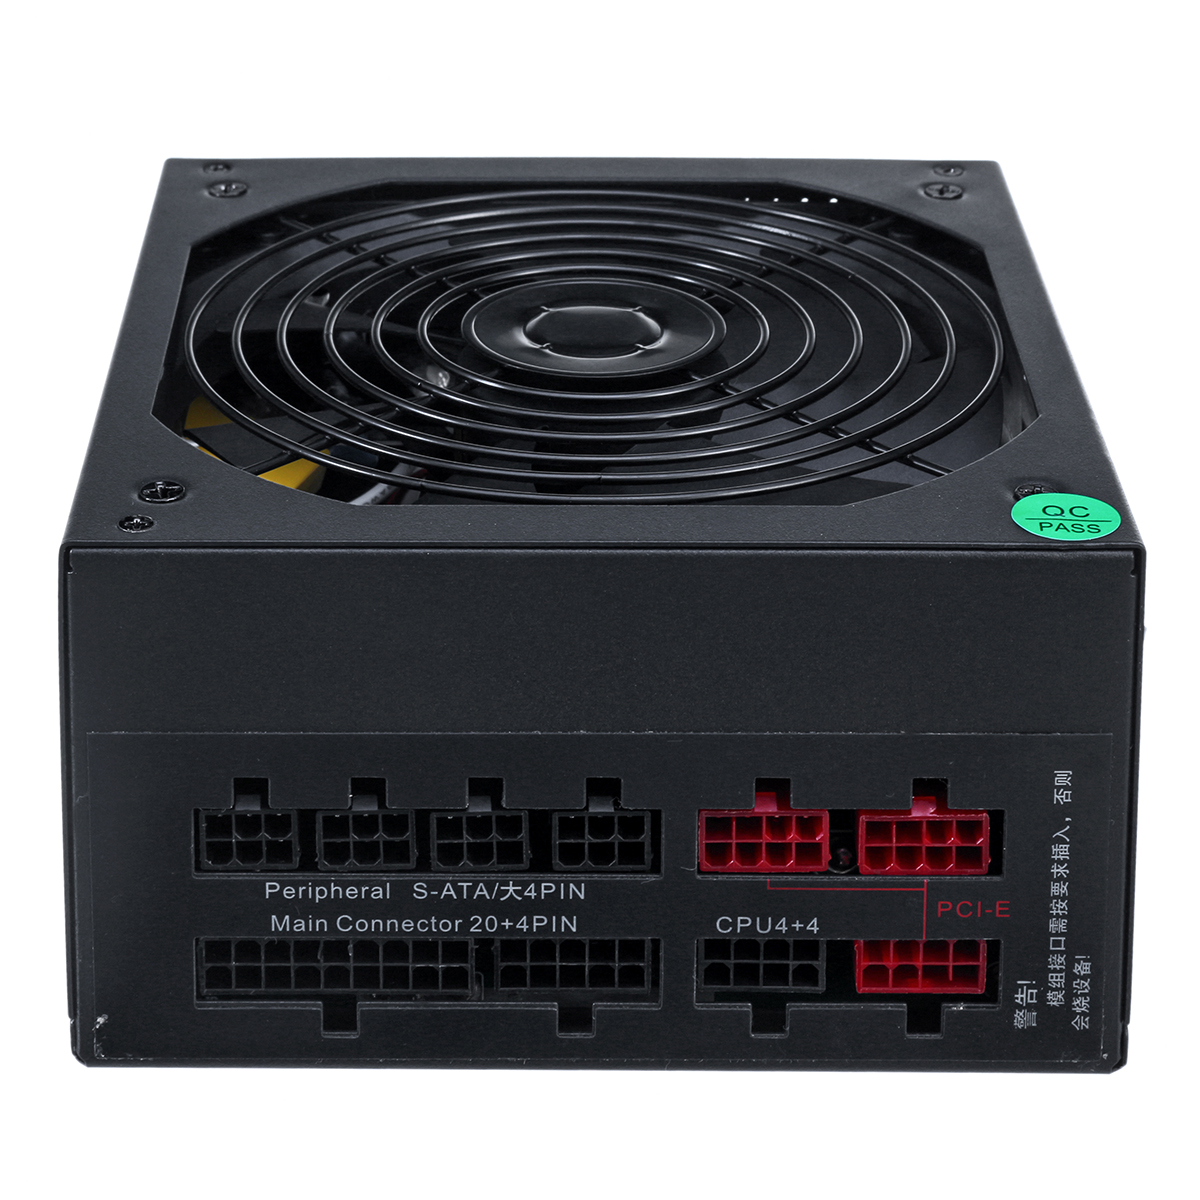 Find 750W Full Module Power Supply 110-230V 14cm Fan 24 Pin PCI SATA 12V EU/US/AU Plug Computer Power Supply for Sale on Gipsybee.com with cryptocurrencies